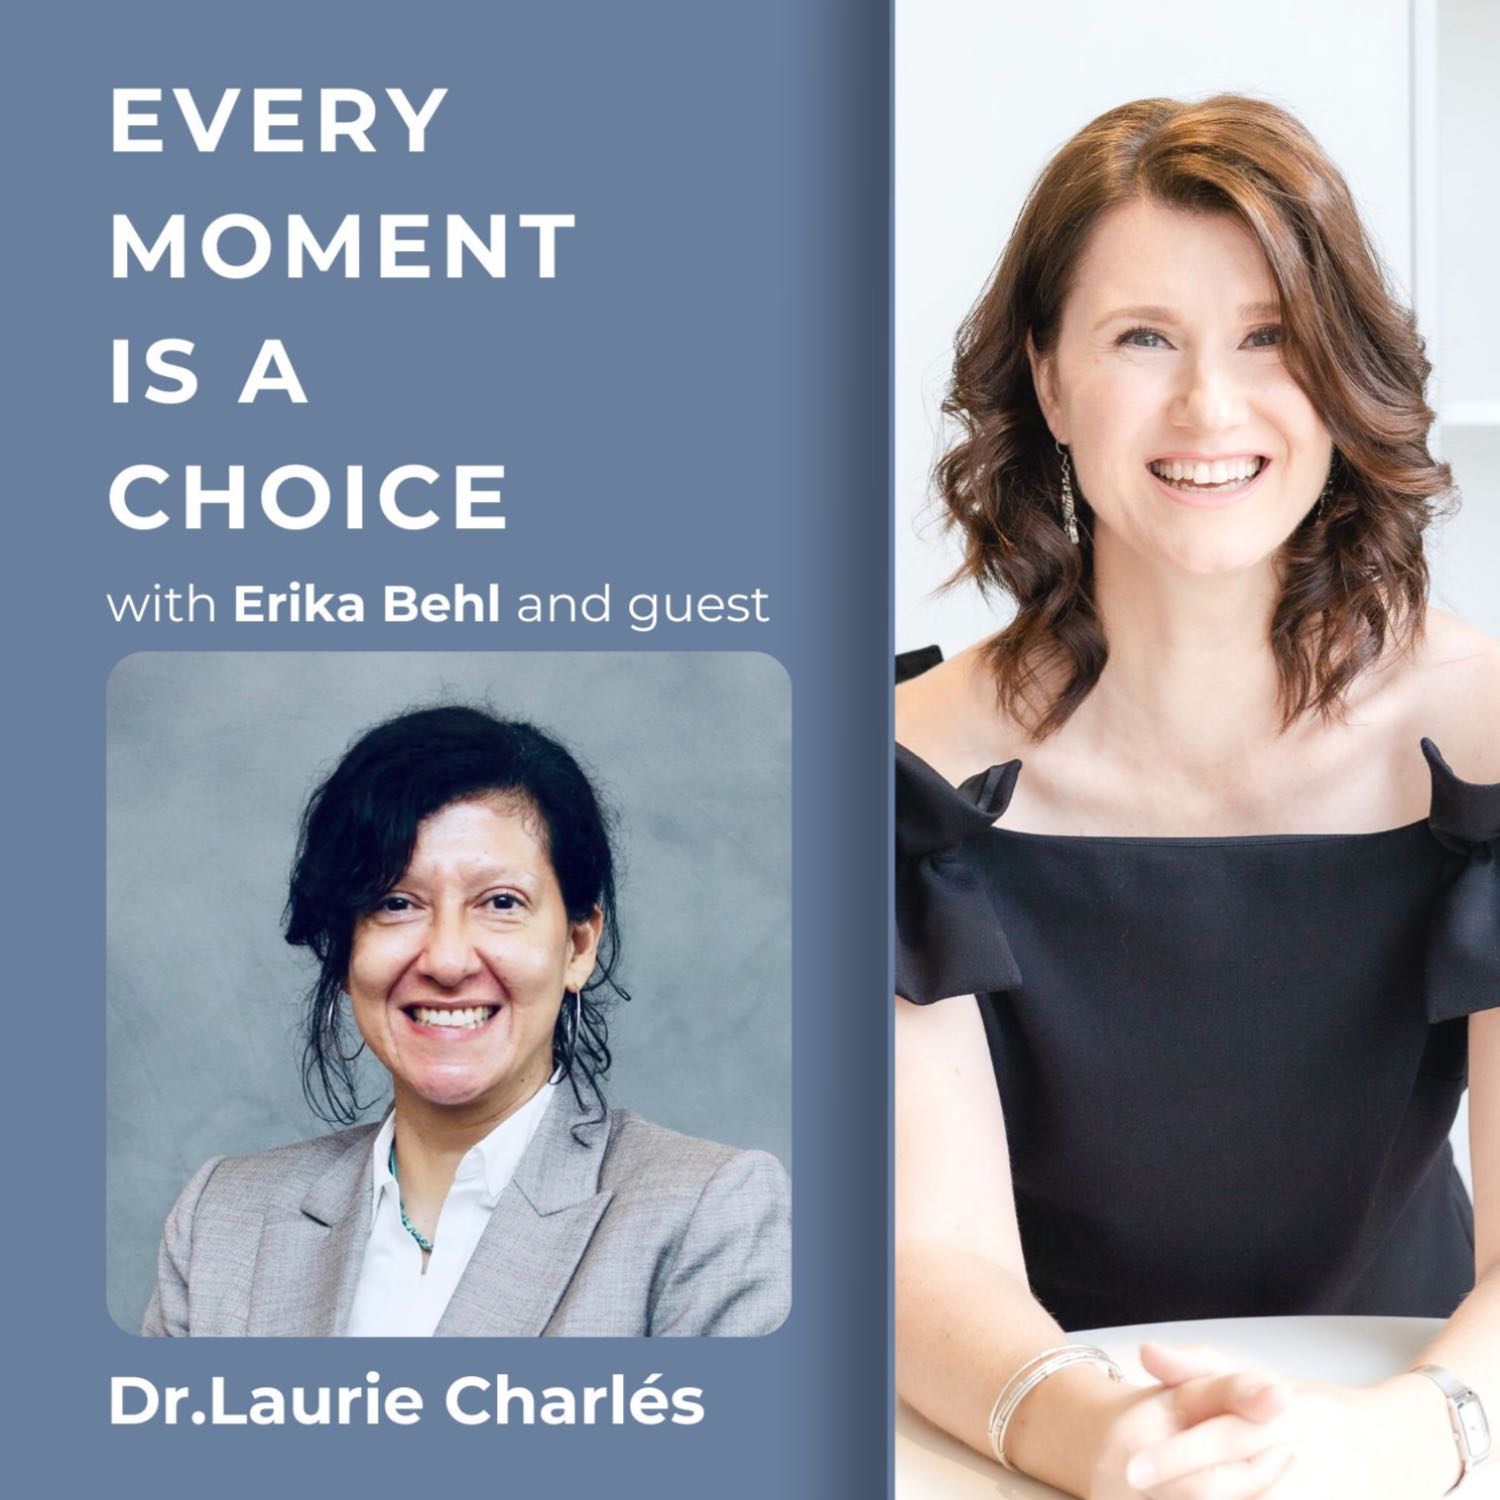 Healing the World: A Journey of Family, Support and Impact with Dr. Laurie Charlés